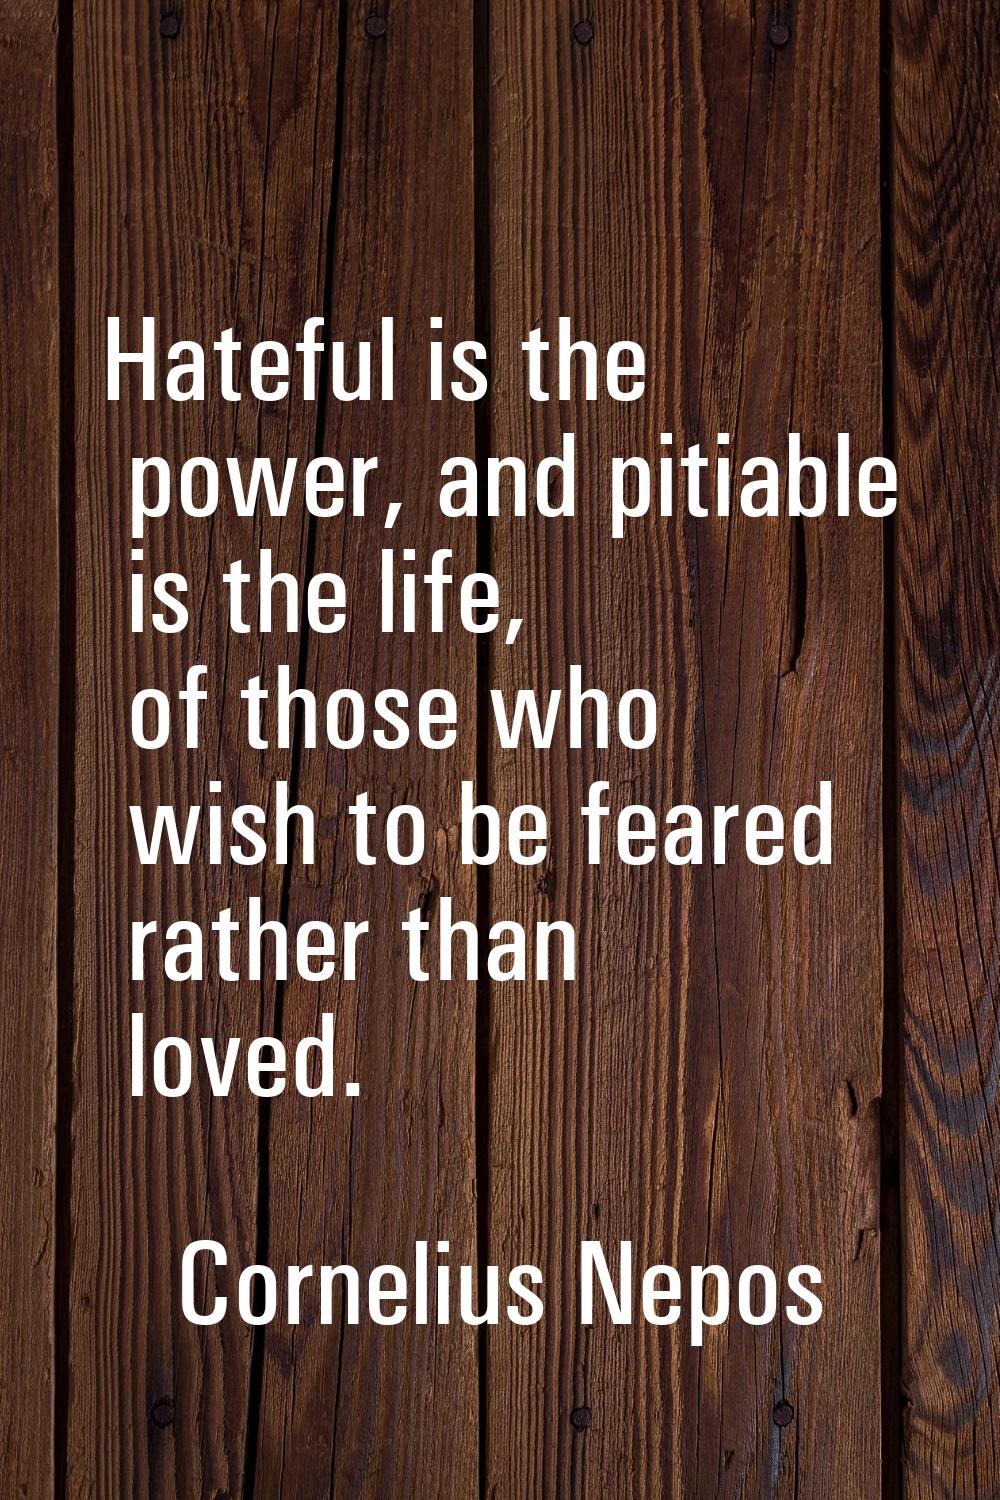 Hateful is the power, and pitiable is the life, of those who wish to be feared rather than loved.